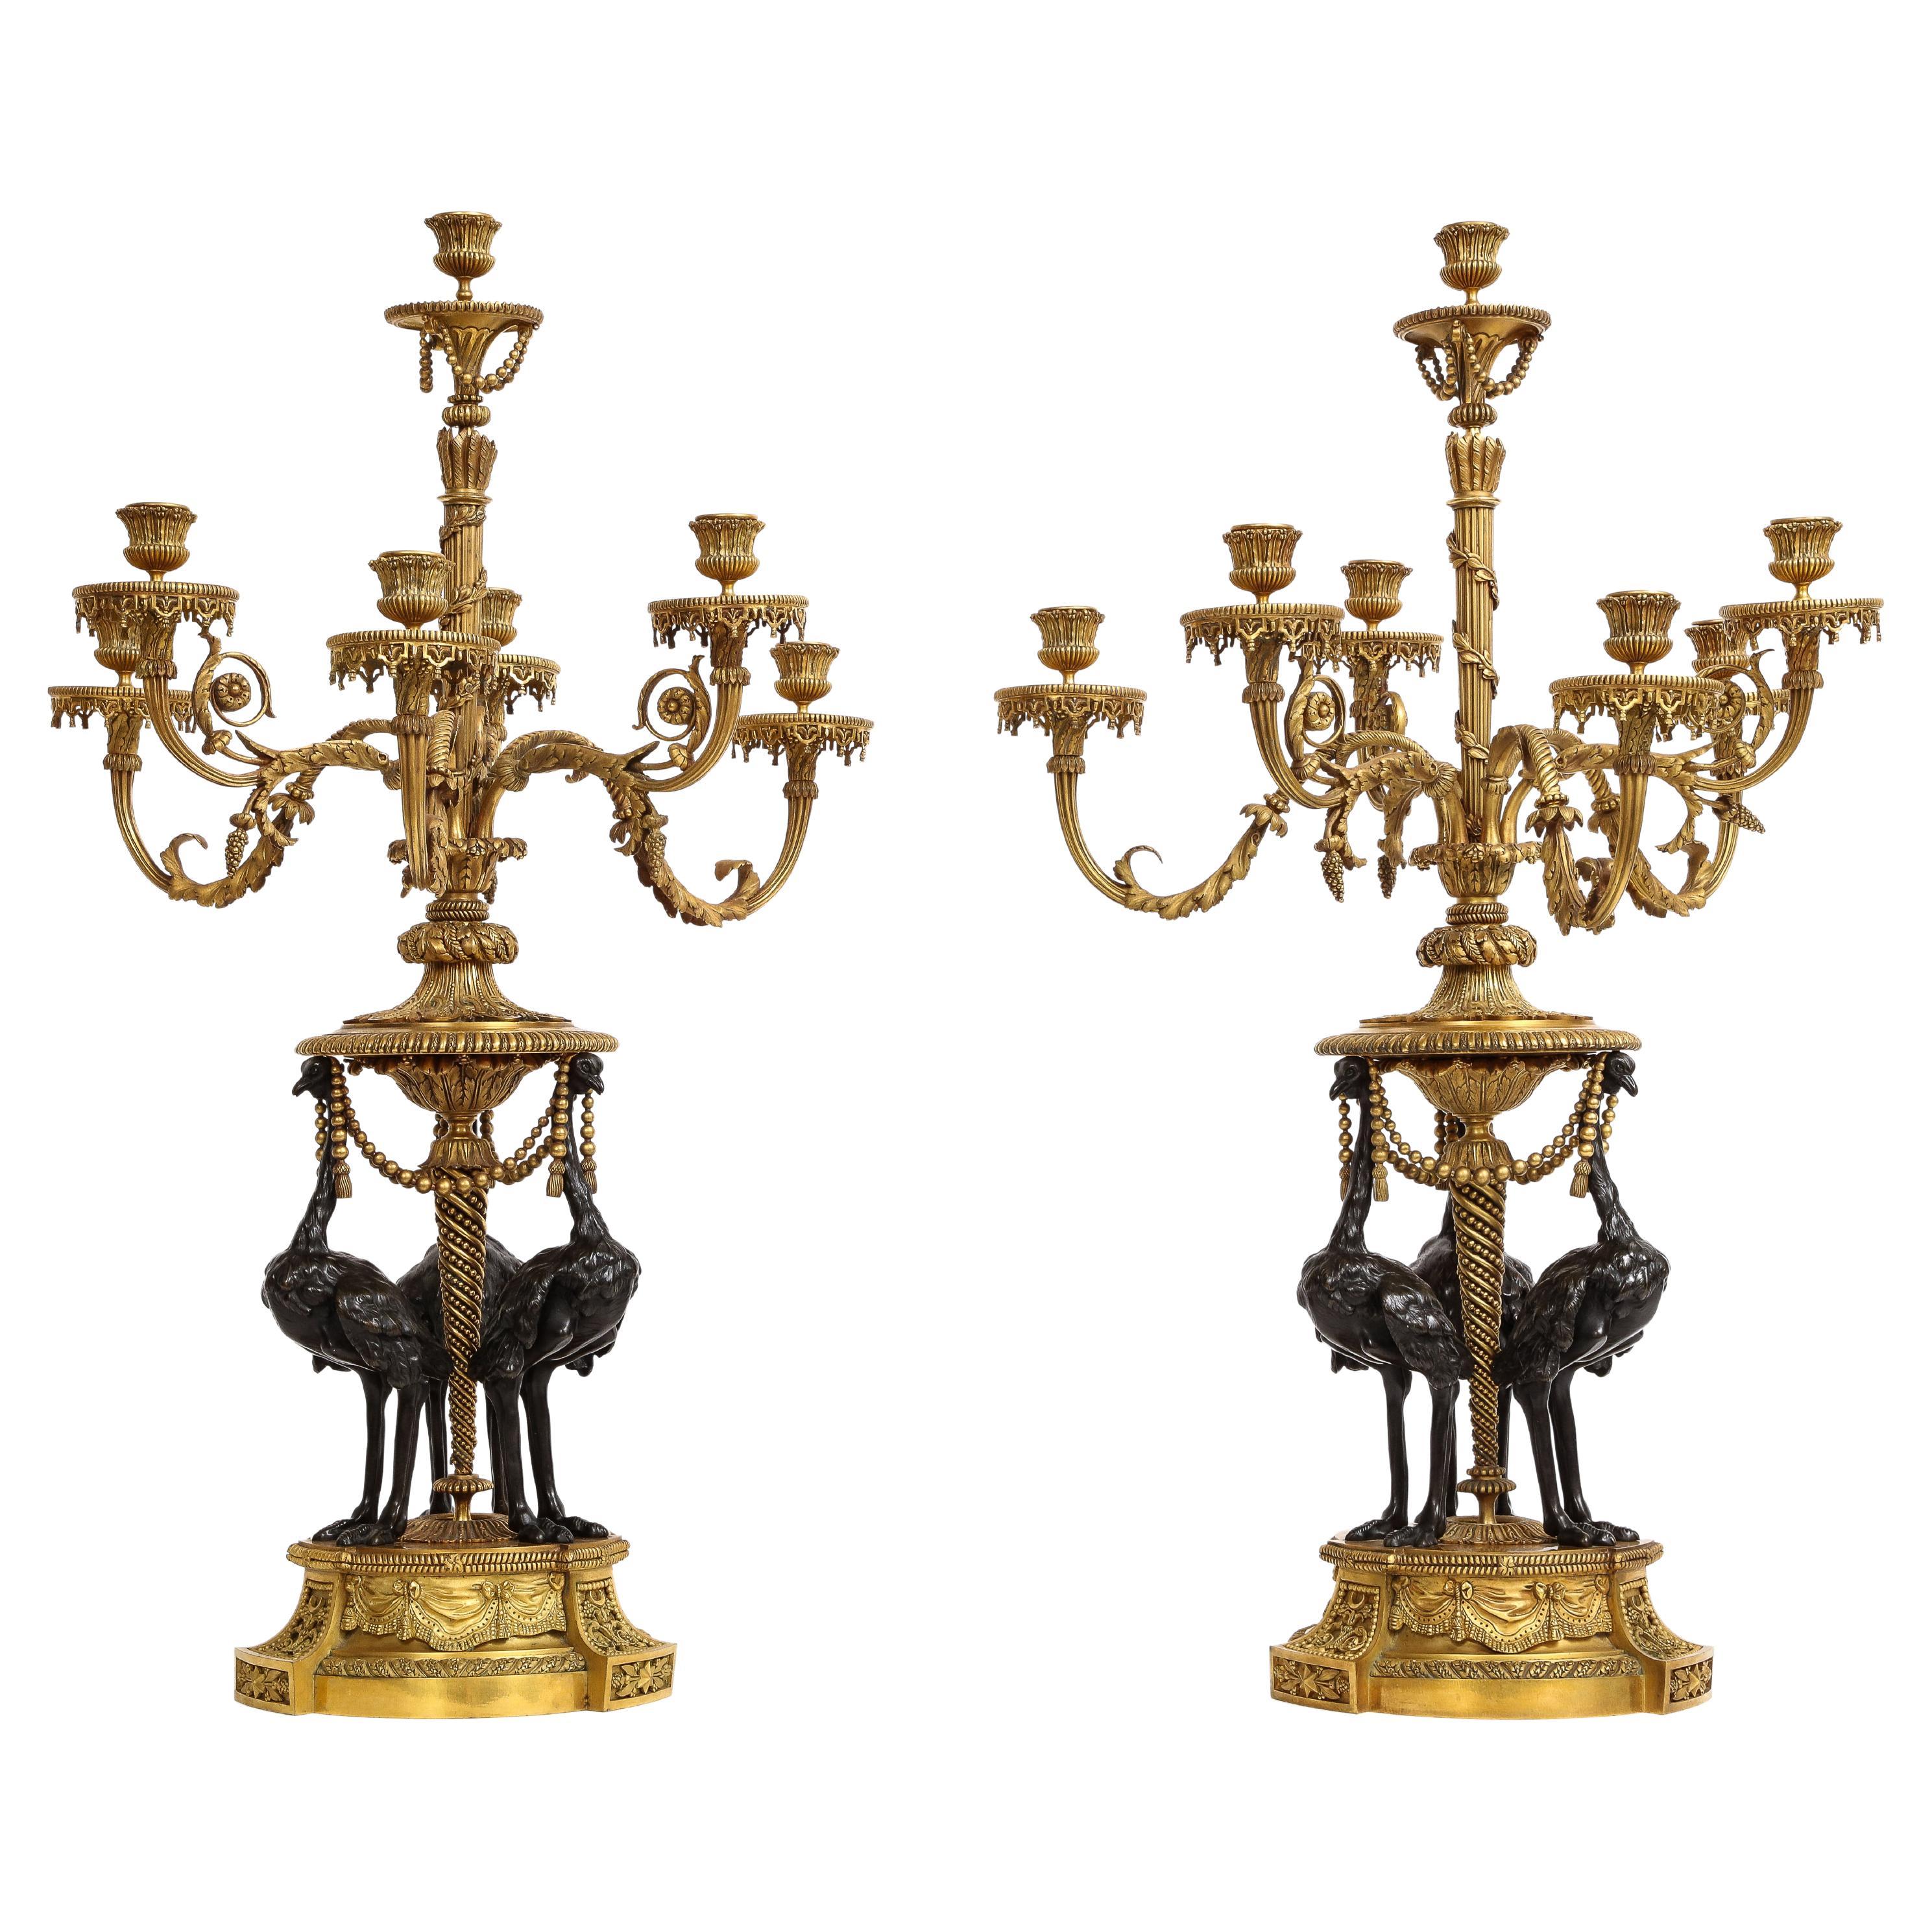 Pair 19th C. French Louis XVI Ormolu & Patinated 7-Arm Candelabra, A. Beurdeley